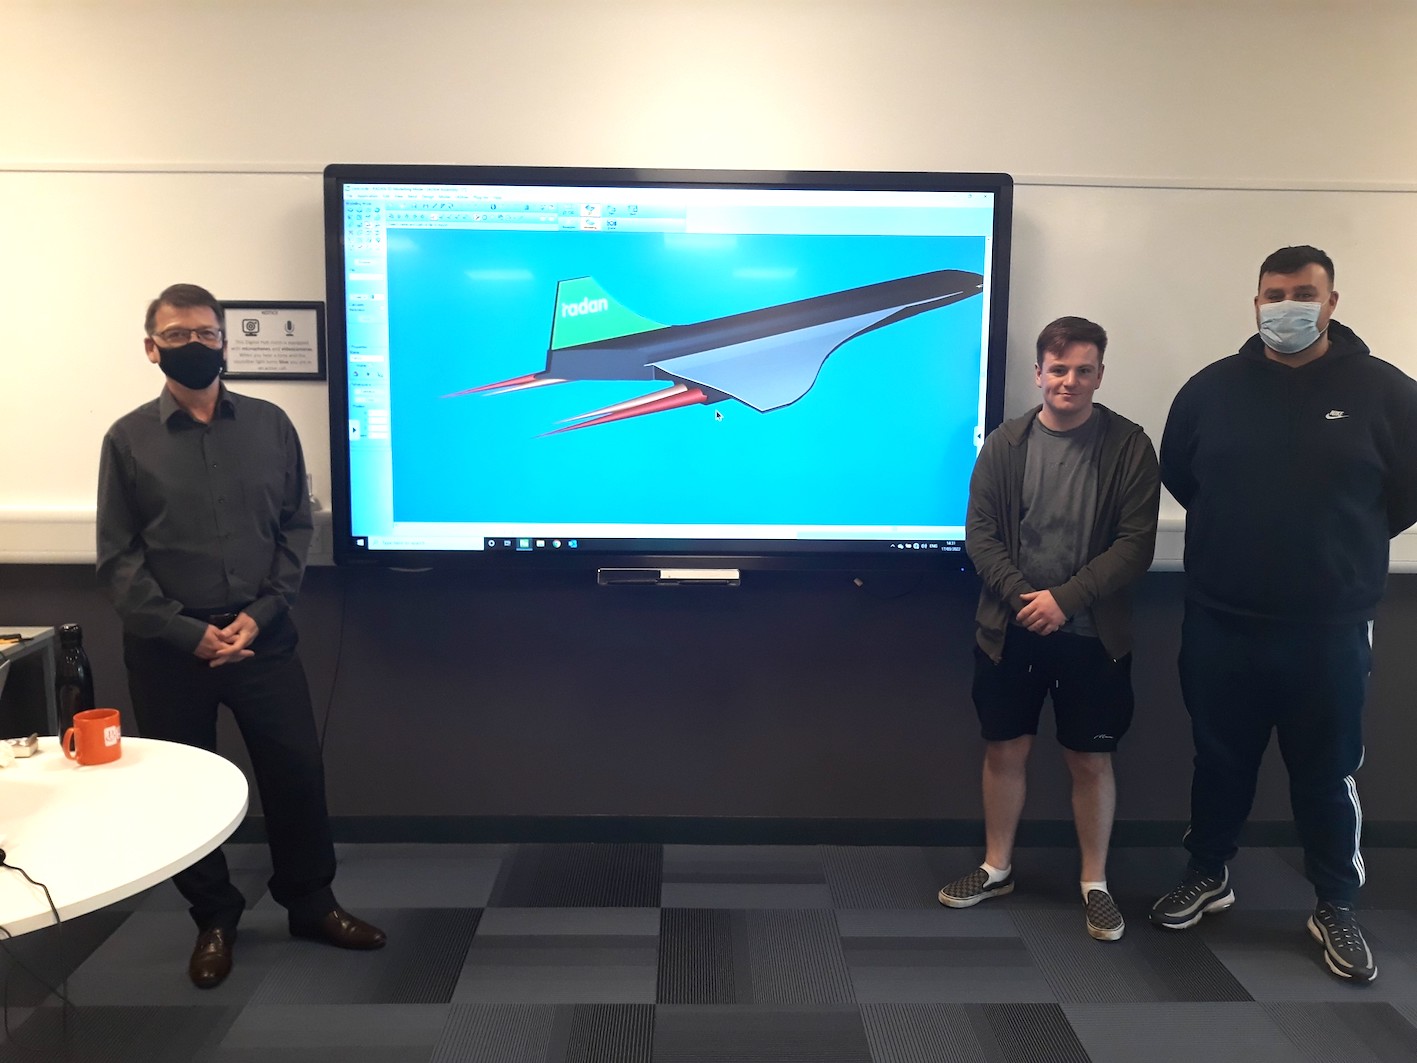 People standing next to large display monitor